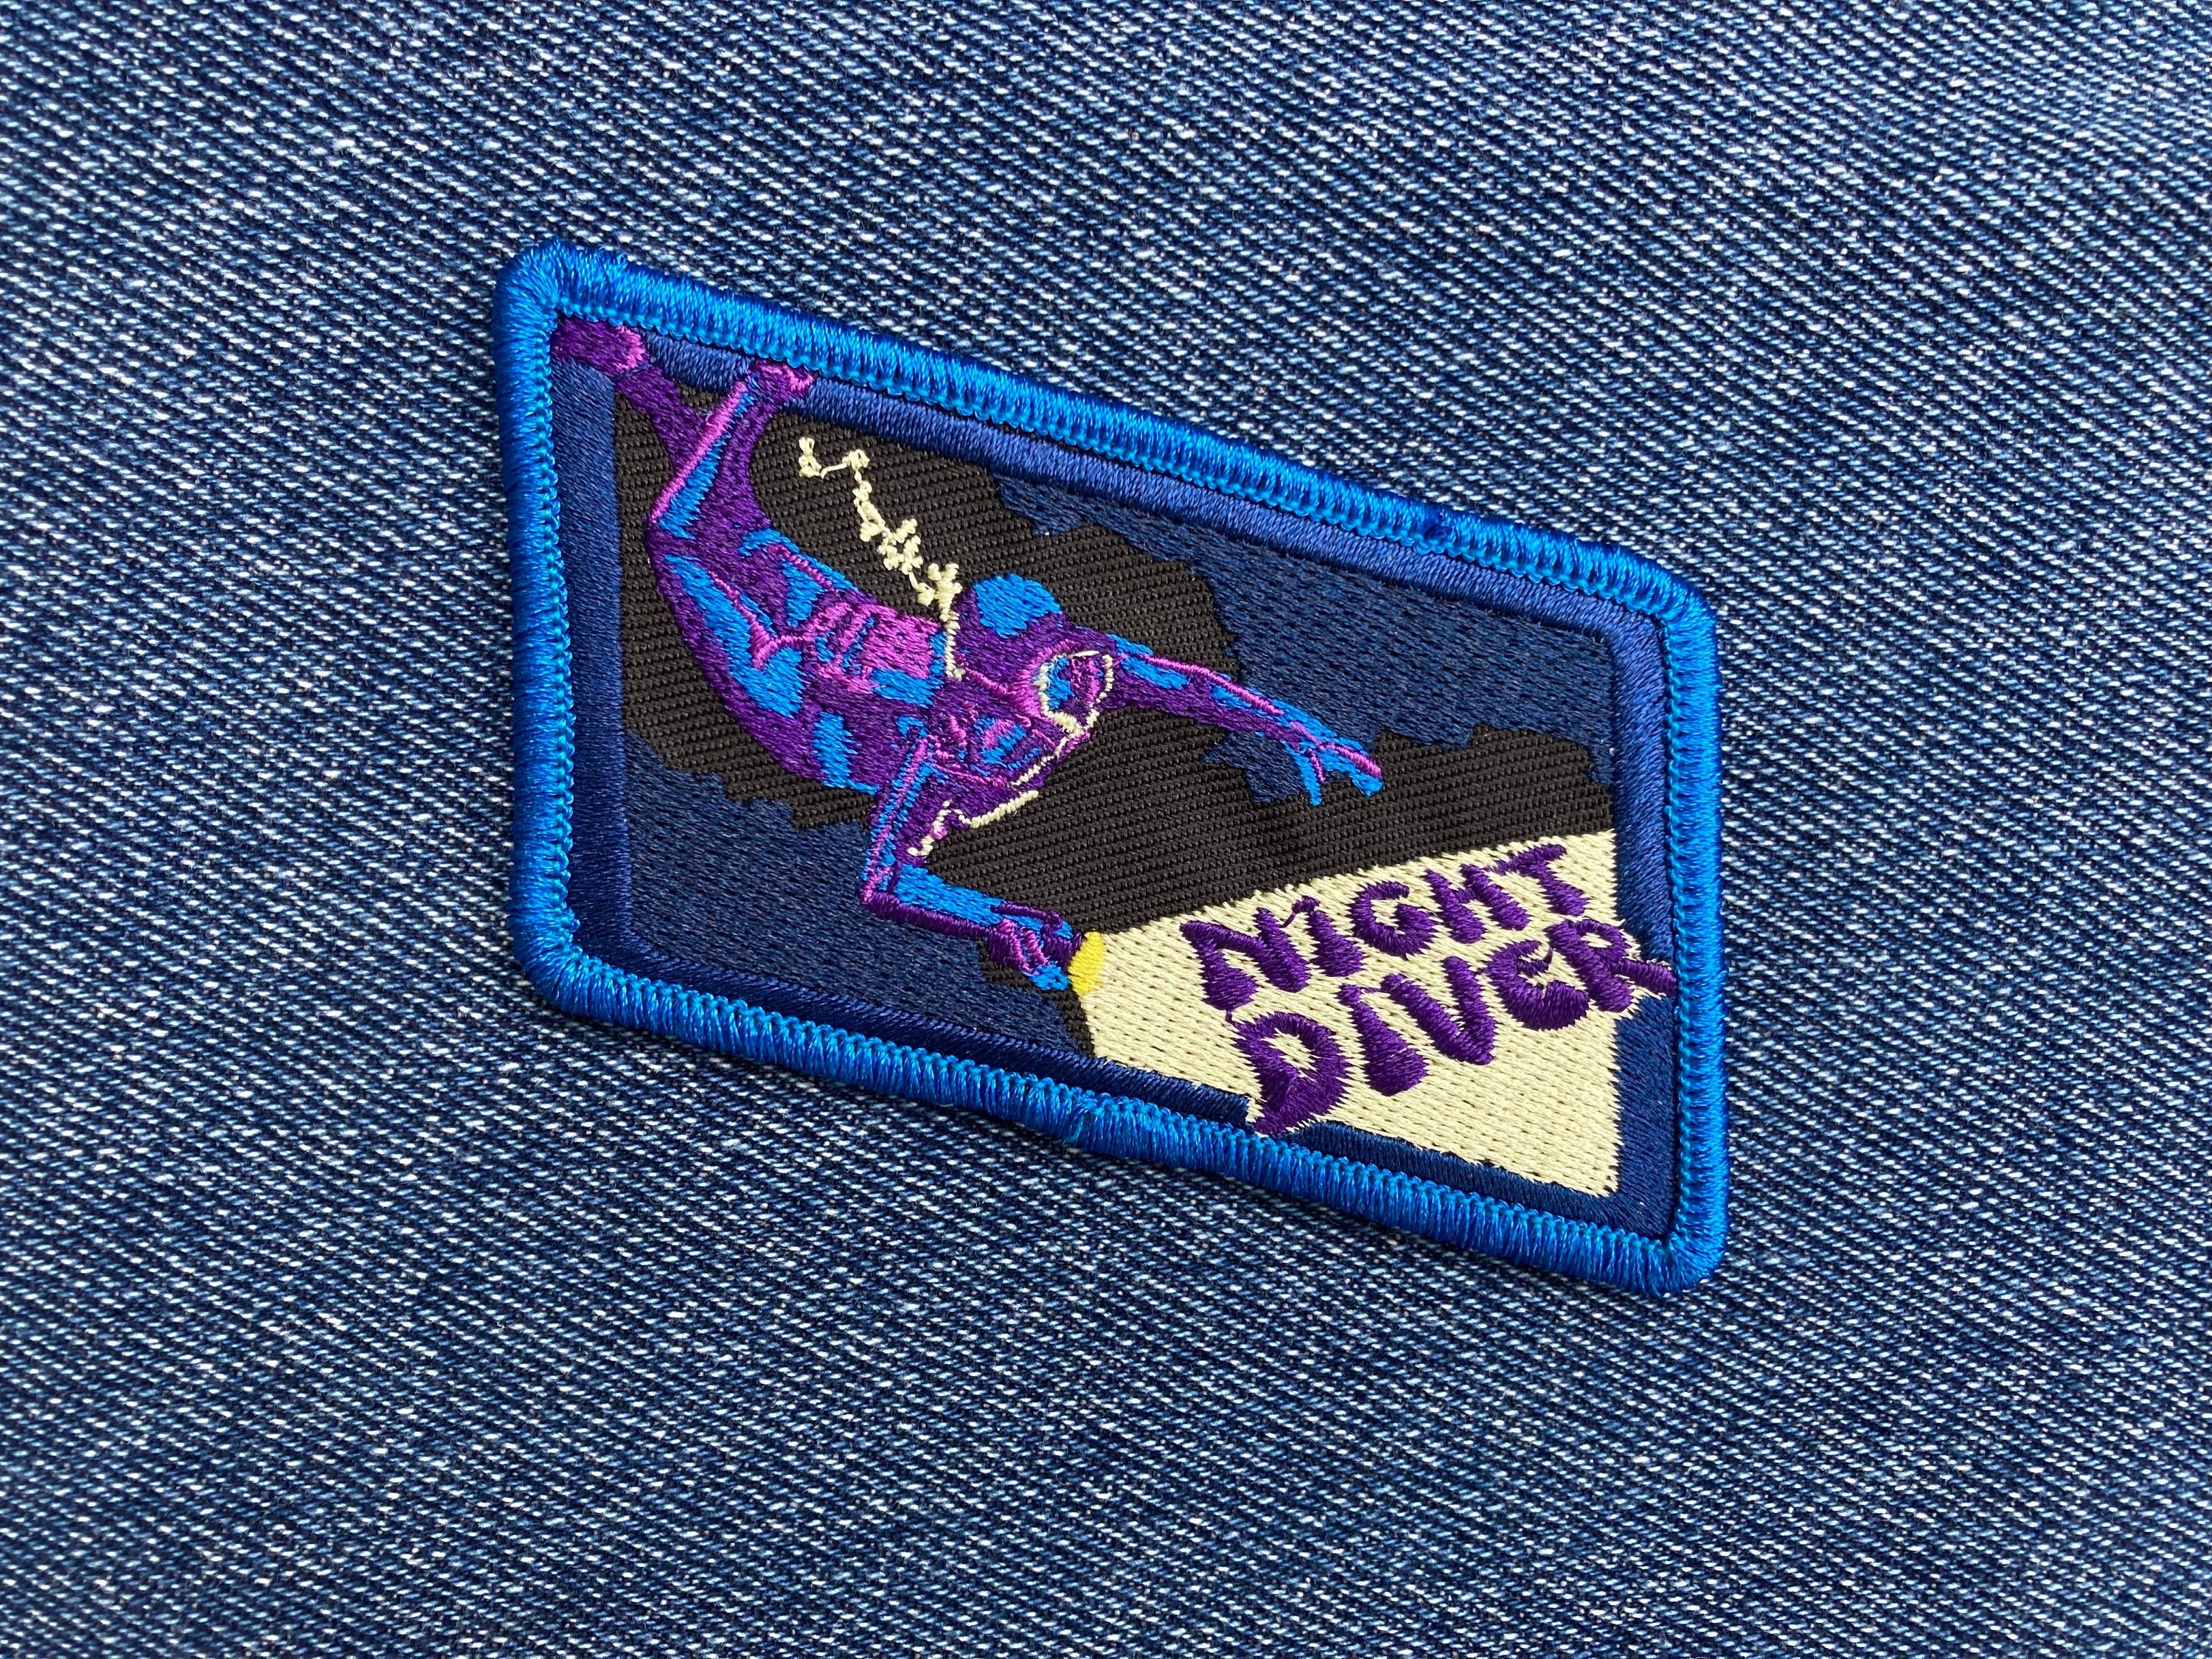 Night Diver Patch for Scuba Adventurers Travel Patches for Scuba Divers  Night Diver Specialty Patch Patch Collection Advanced Diver Badge